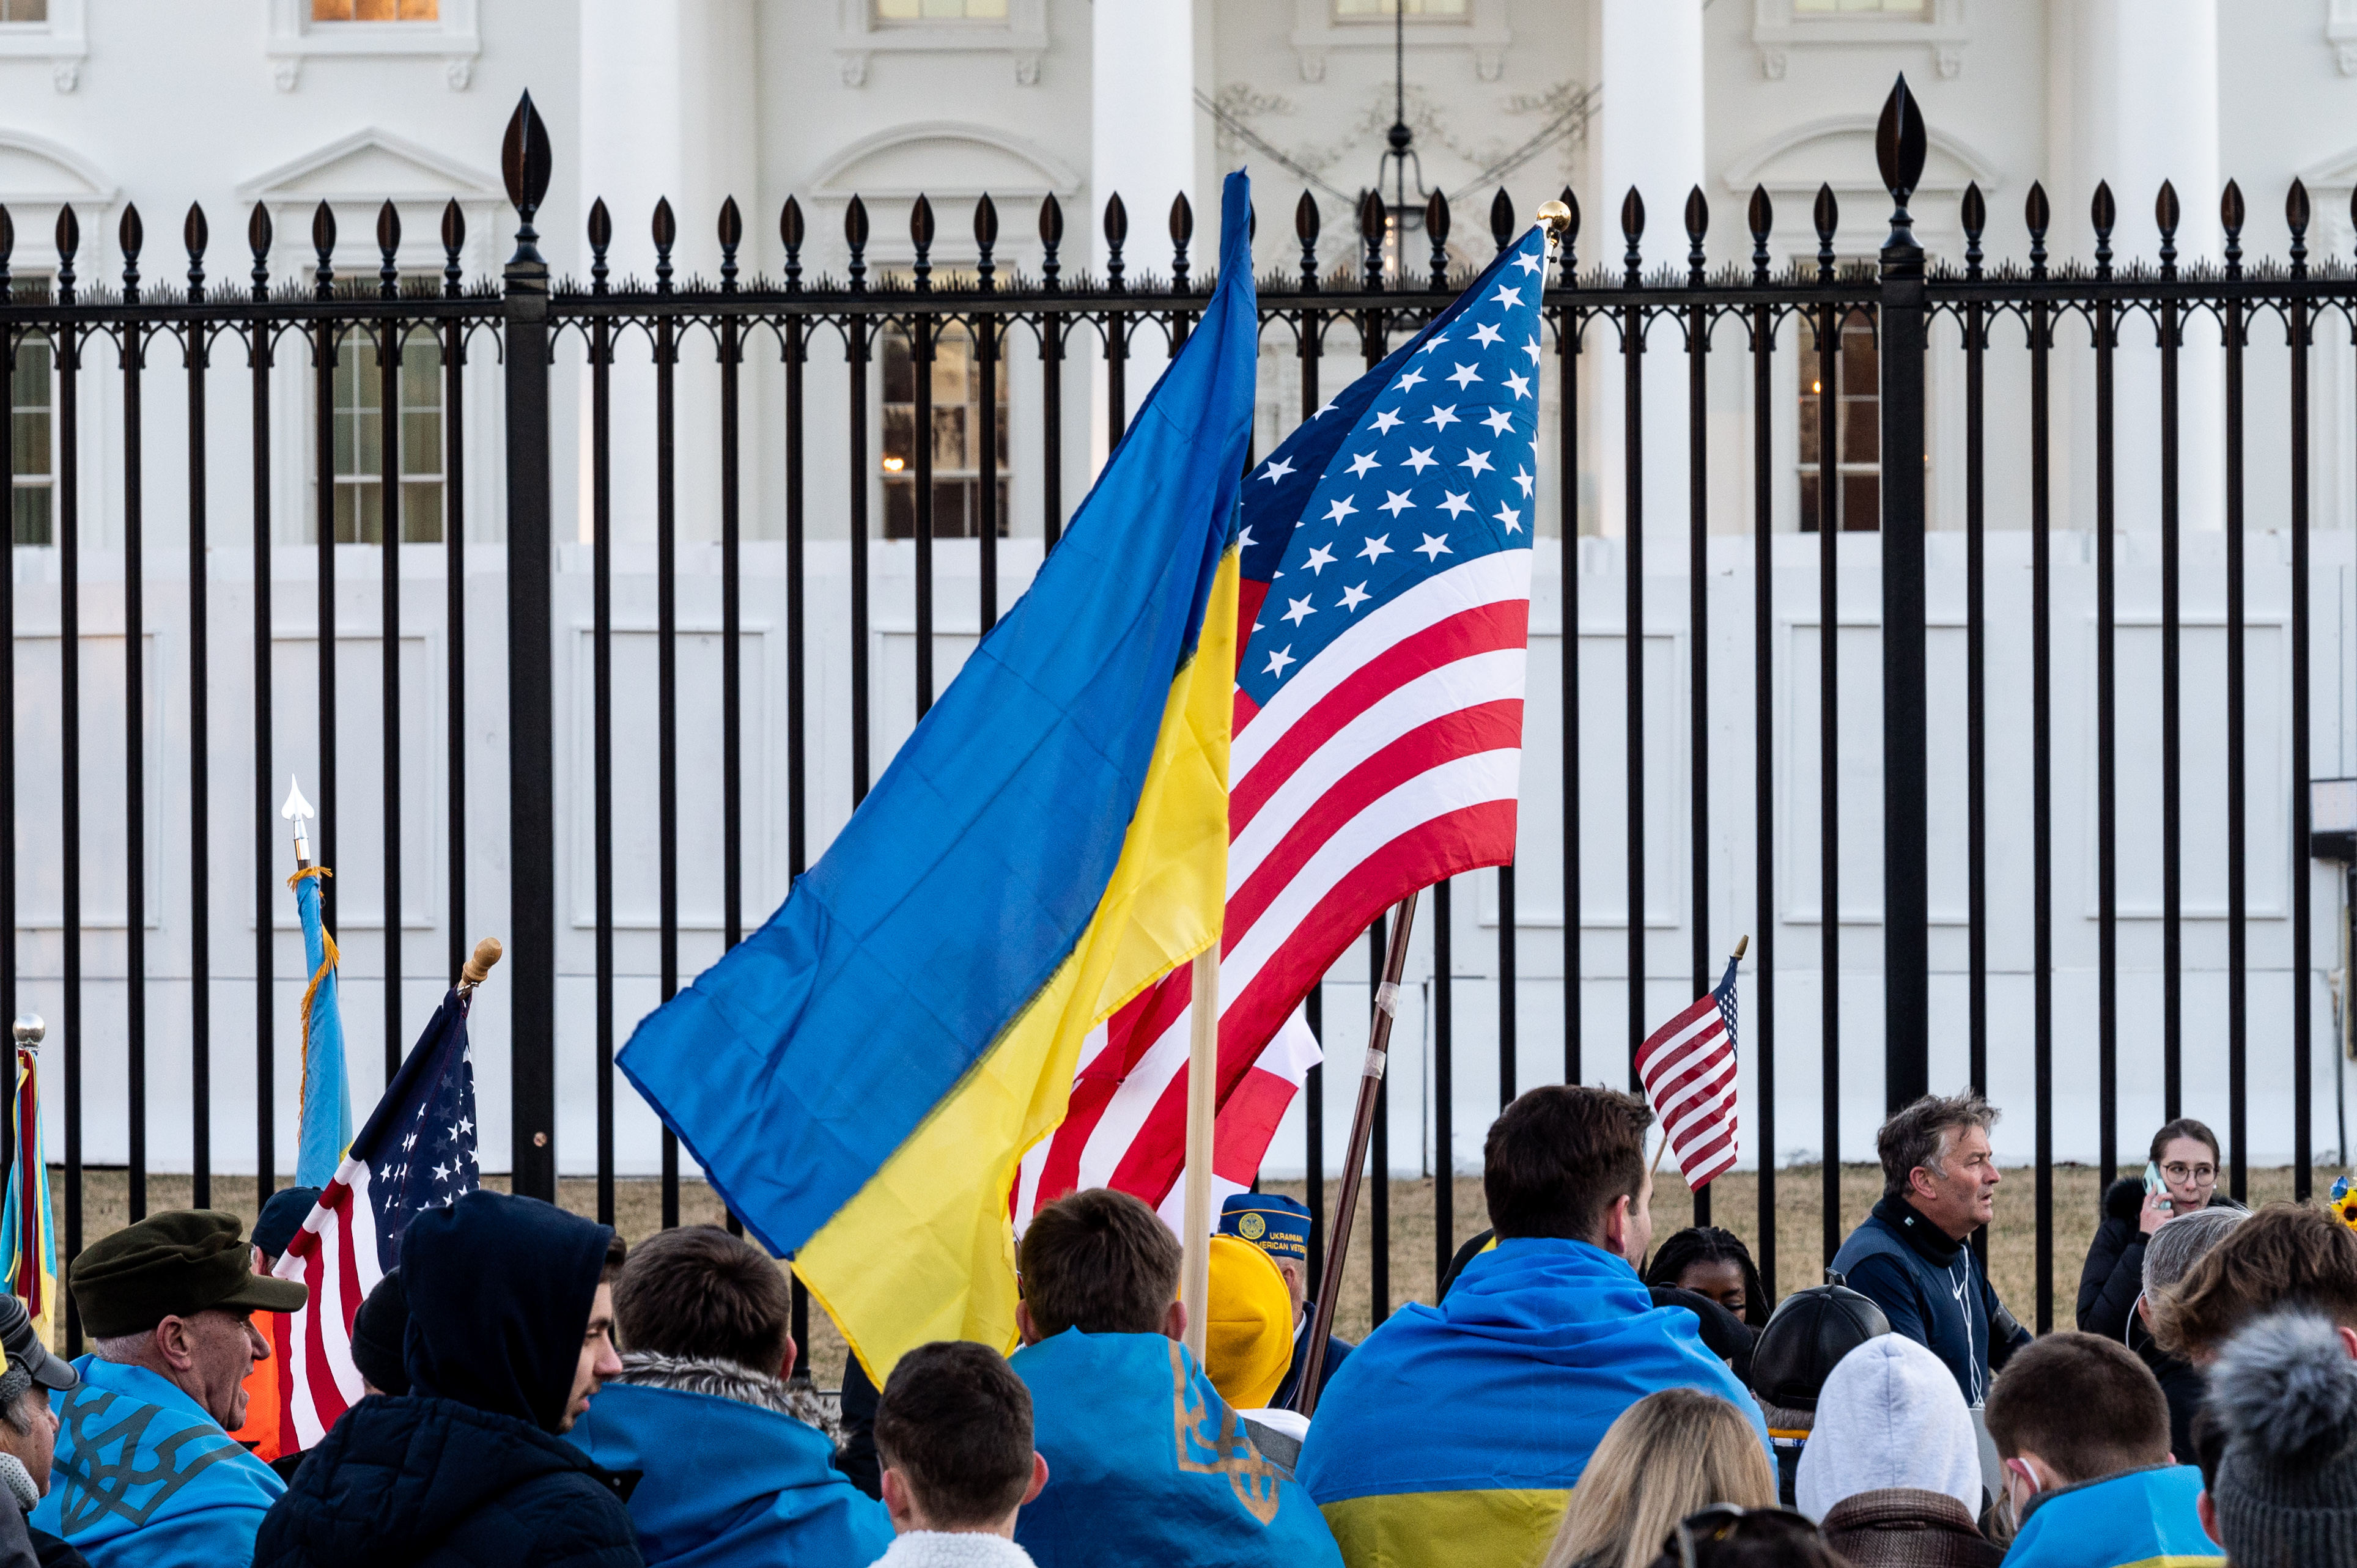 February 20, 2022 - Washington, DC, United States: People with Ukrainian and American flags in front of the White House at the Stand With Ukraine rally. (Photo by Michael Brochstein/Sipa USA)No Use Germany.